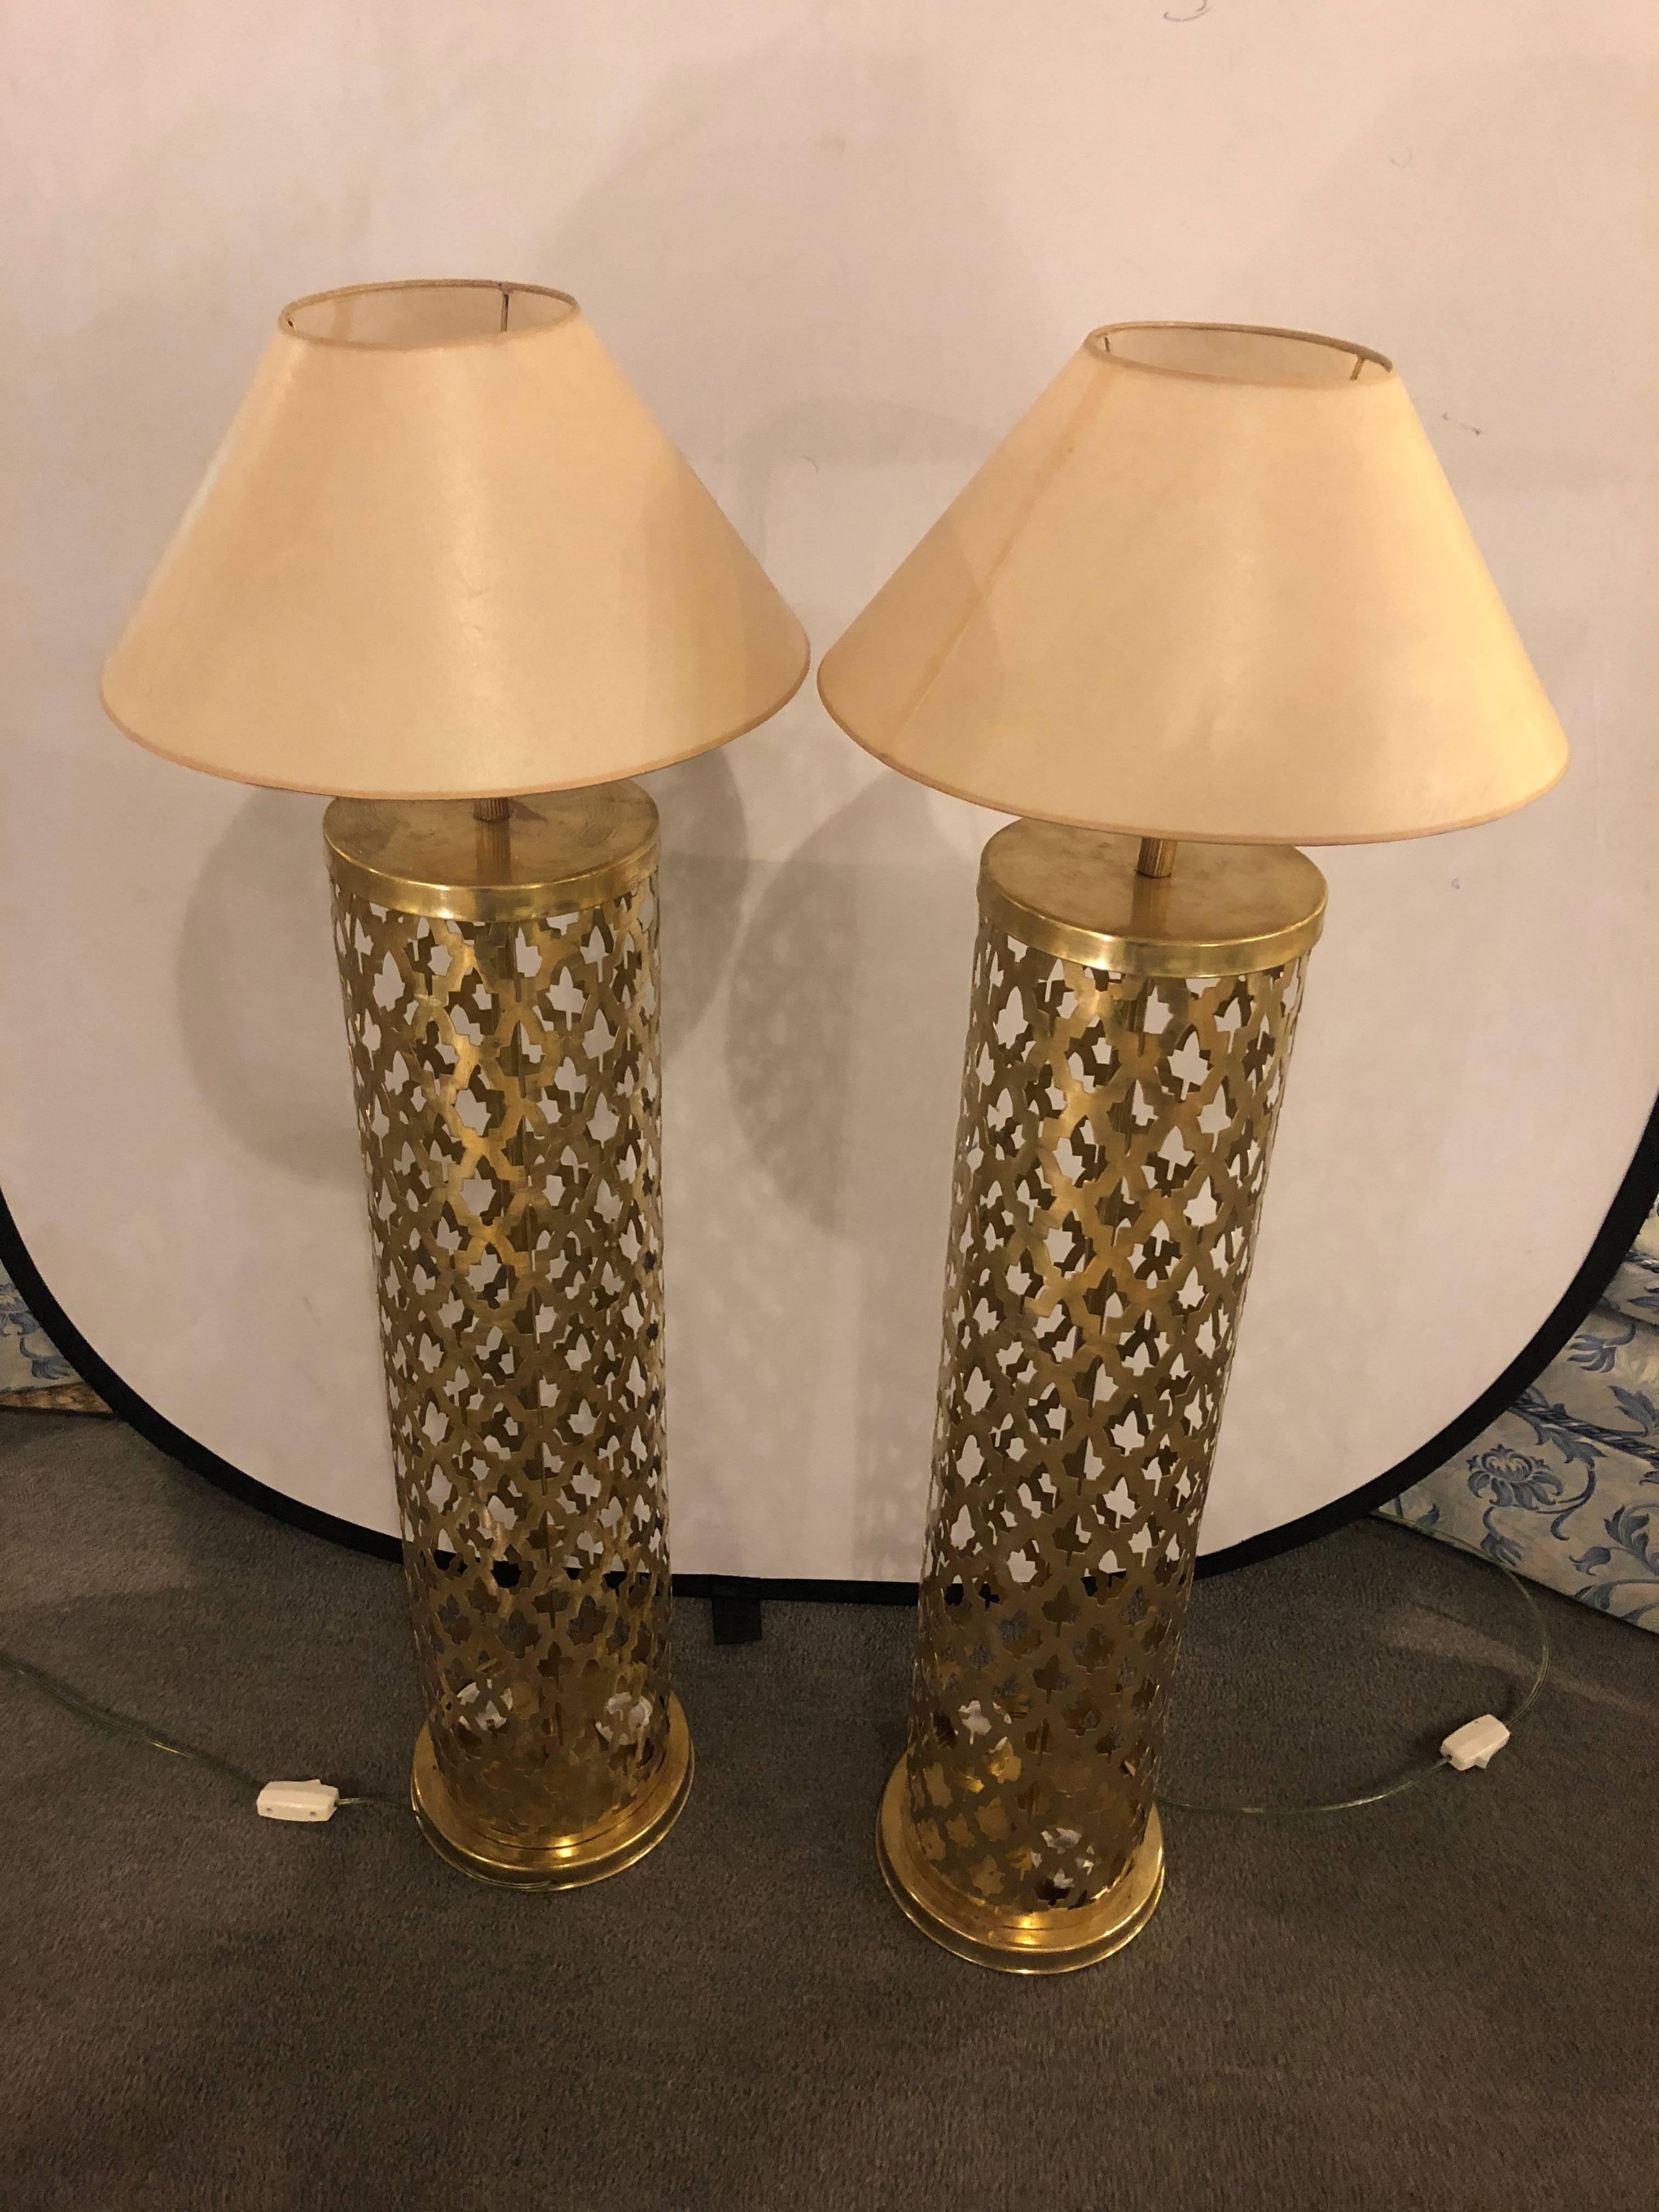 Tall handmade brass pair of lamps with two bottom lights and upper light. This handcrafted tall floor lamp is hand-tooled bronze in amoorish elegant and modern style. The lamps create a diffuse light. creating a soft and soothing effect.
   